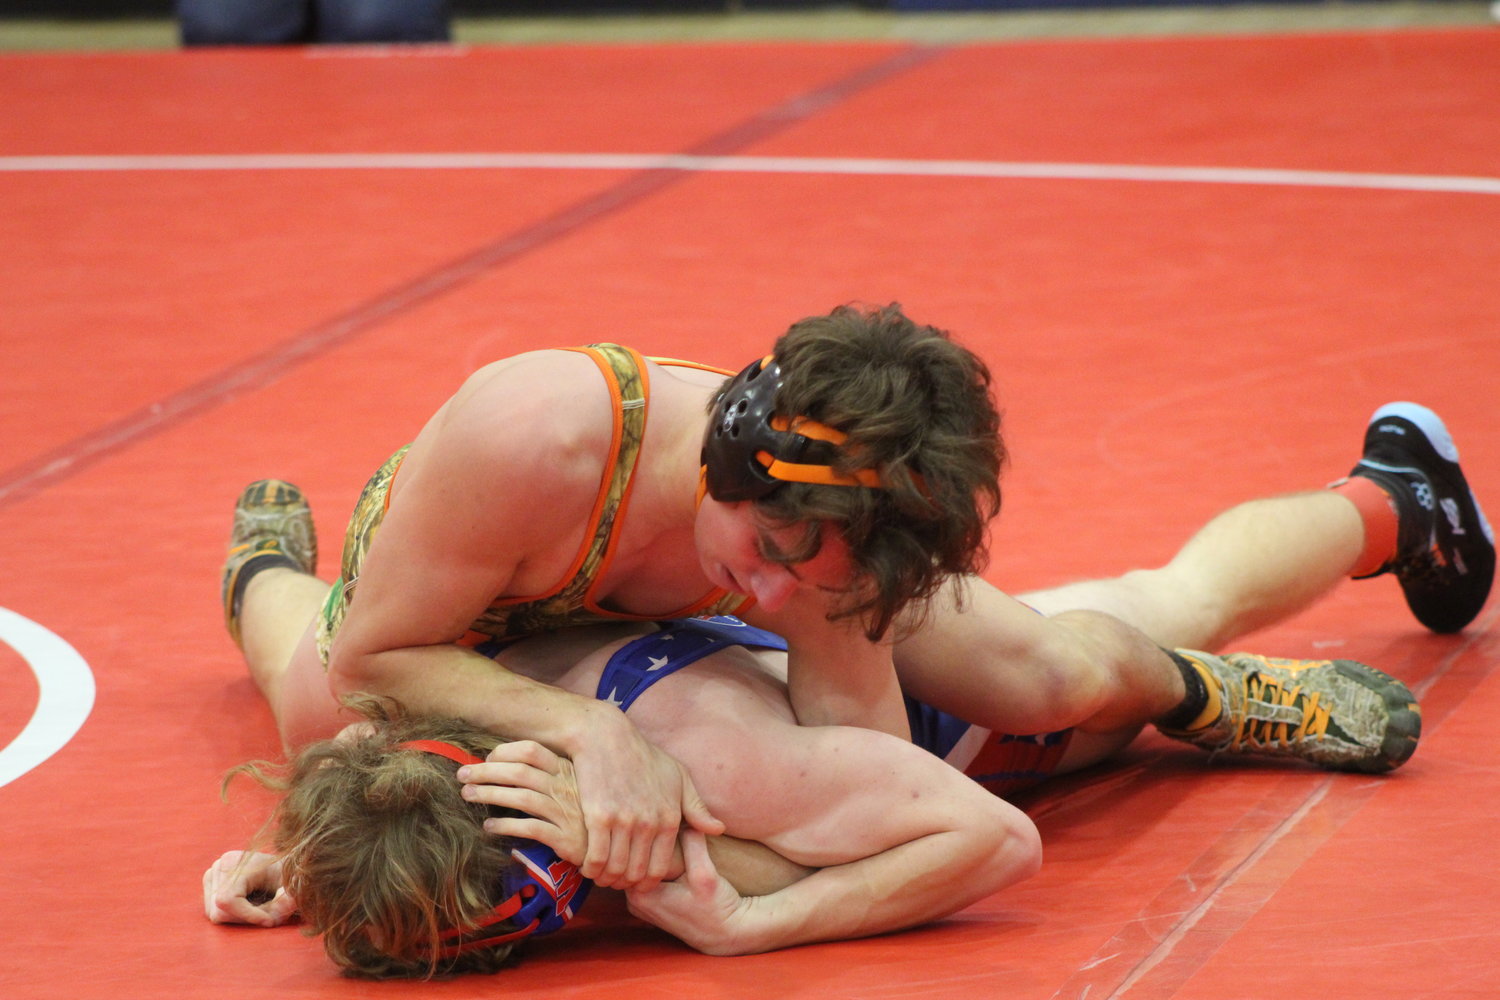 North Montgomery's Nolan Yarger took home the SAC title at 132 lbs.